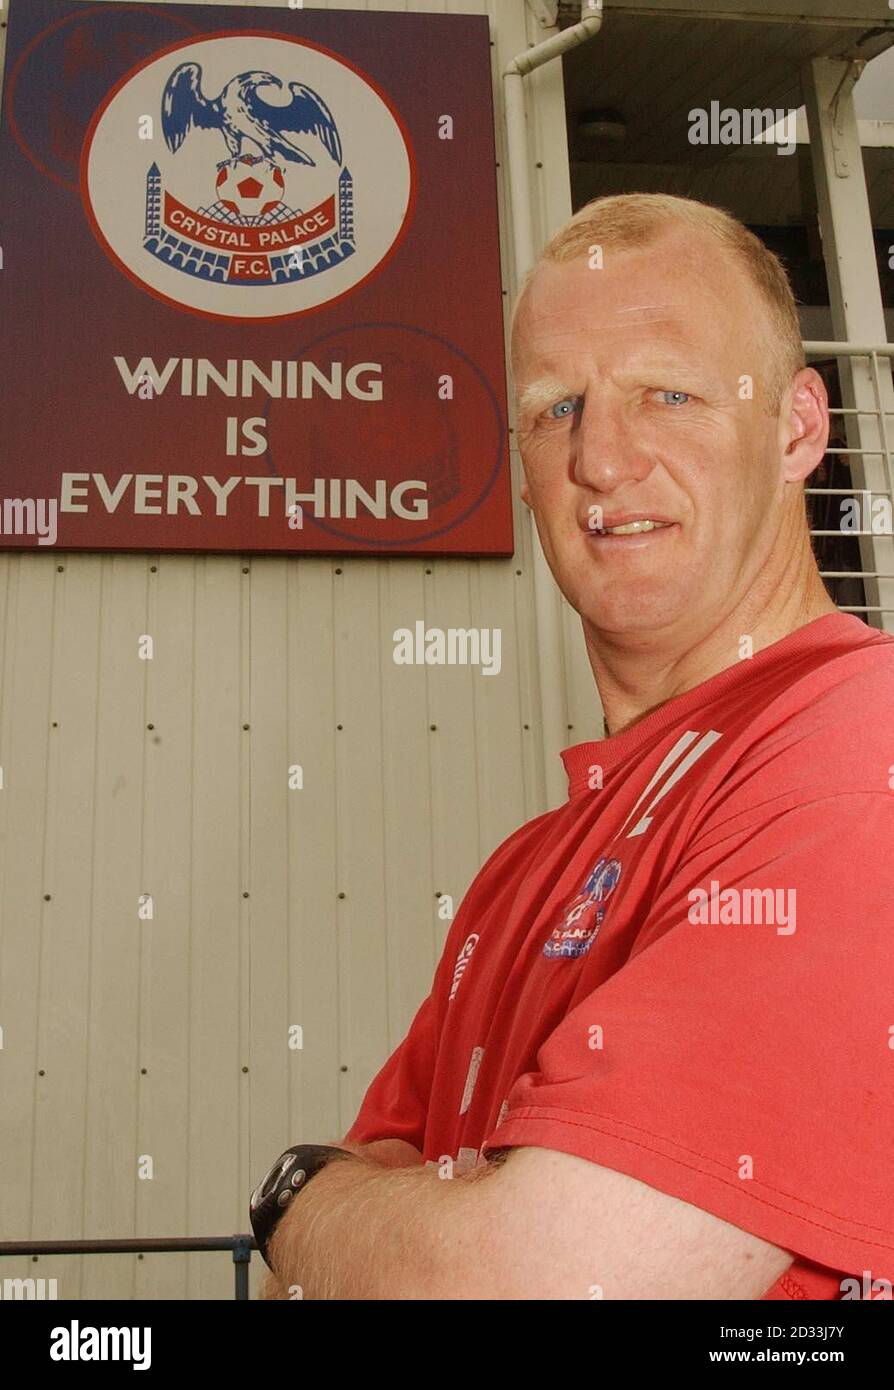 Crystal Palace manager Iain Dowie during a photo-call at Beckenham Training Ground, Beckenham, ahead of their Nationwide Division One play-off final against West Ham United at the Millennium Stadium in Cardiff on Saturday.     THIS PICTURE CAN ONLY BE USED WITHIN THE CONTEXT OF AN EDITORIAL FEATURE. NO UNOFFICIAL CLUB WEBSITE USE. Stock Photo